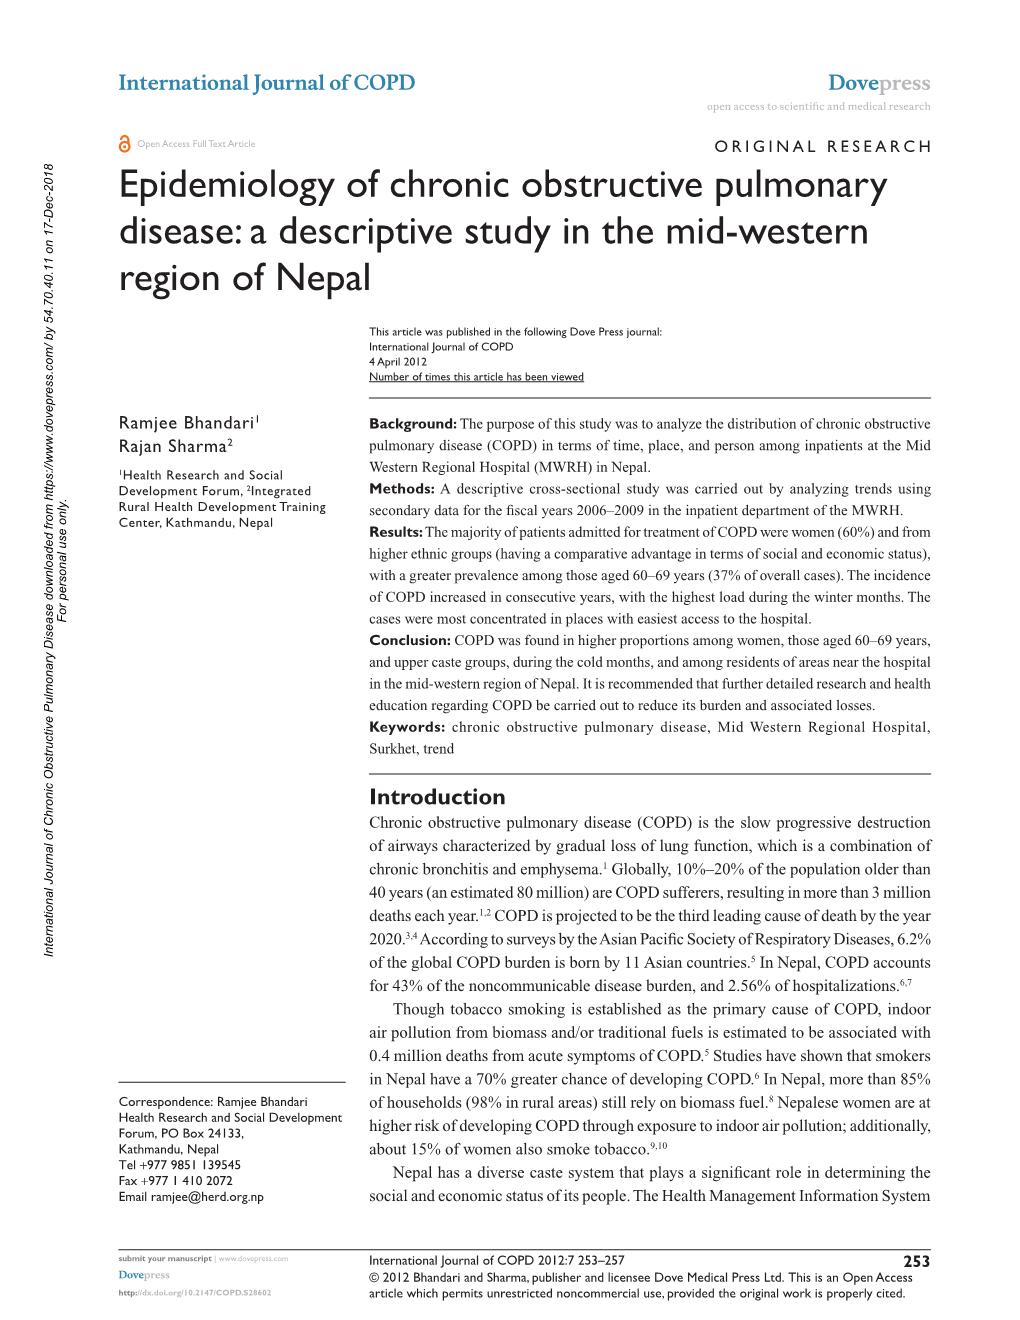 Epidemiology of Chronic Obstructive Pulmonary Disease: a Descriptive Study in the Mid-Western Region of Nepal